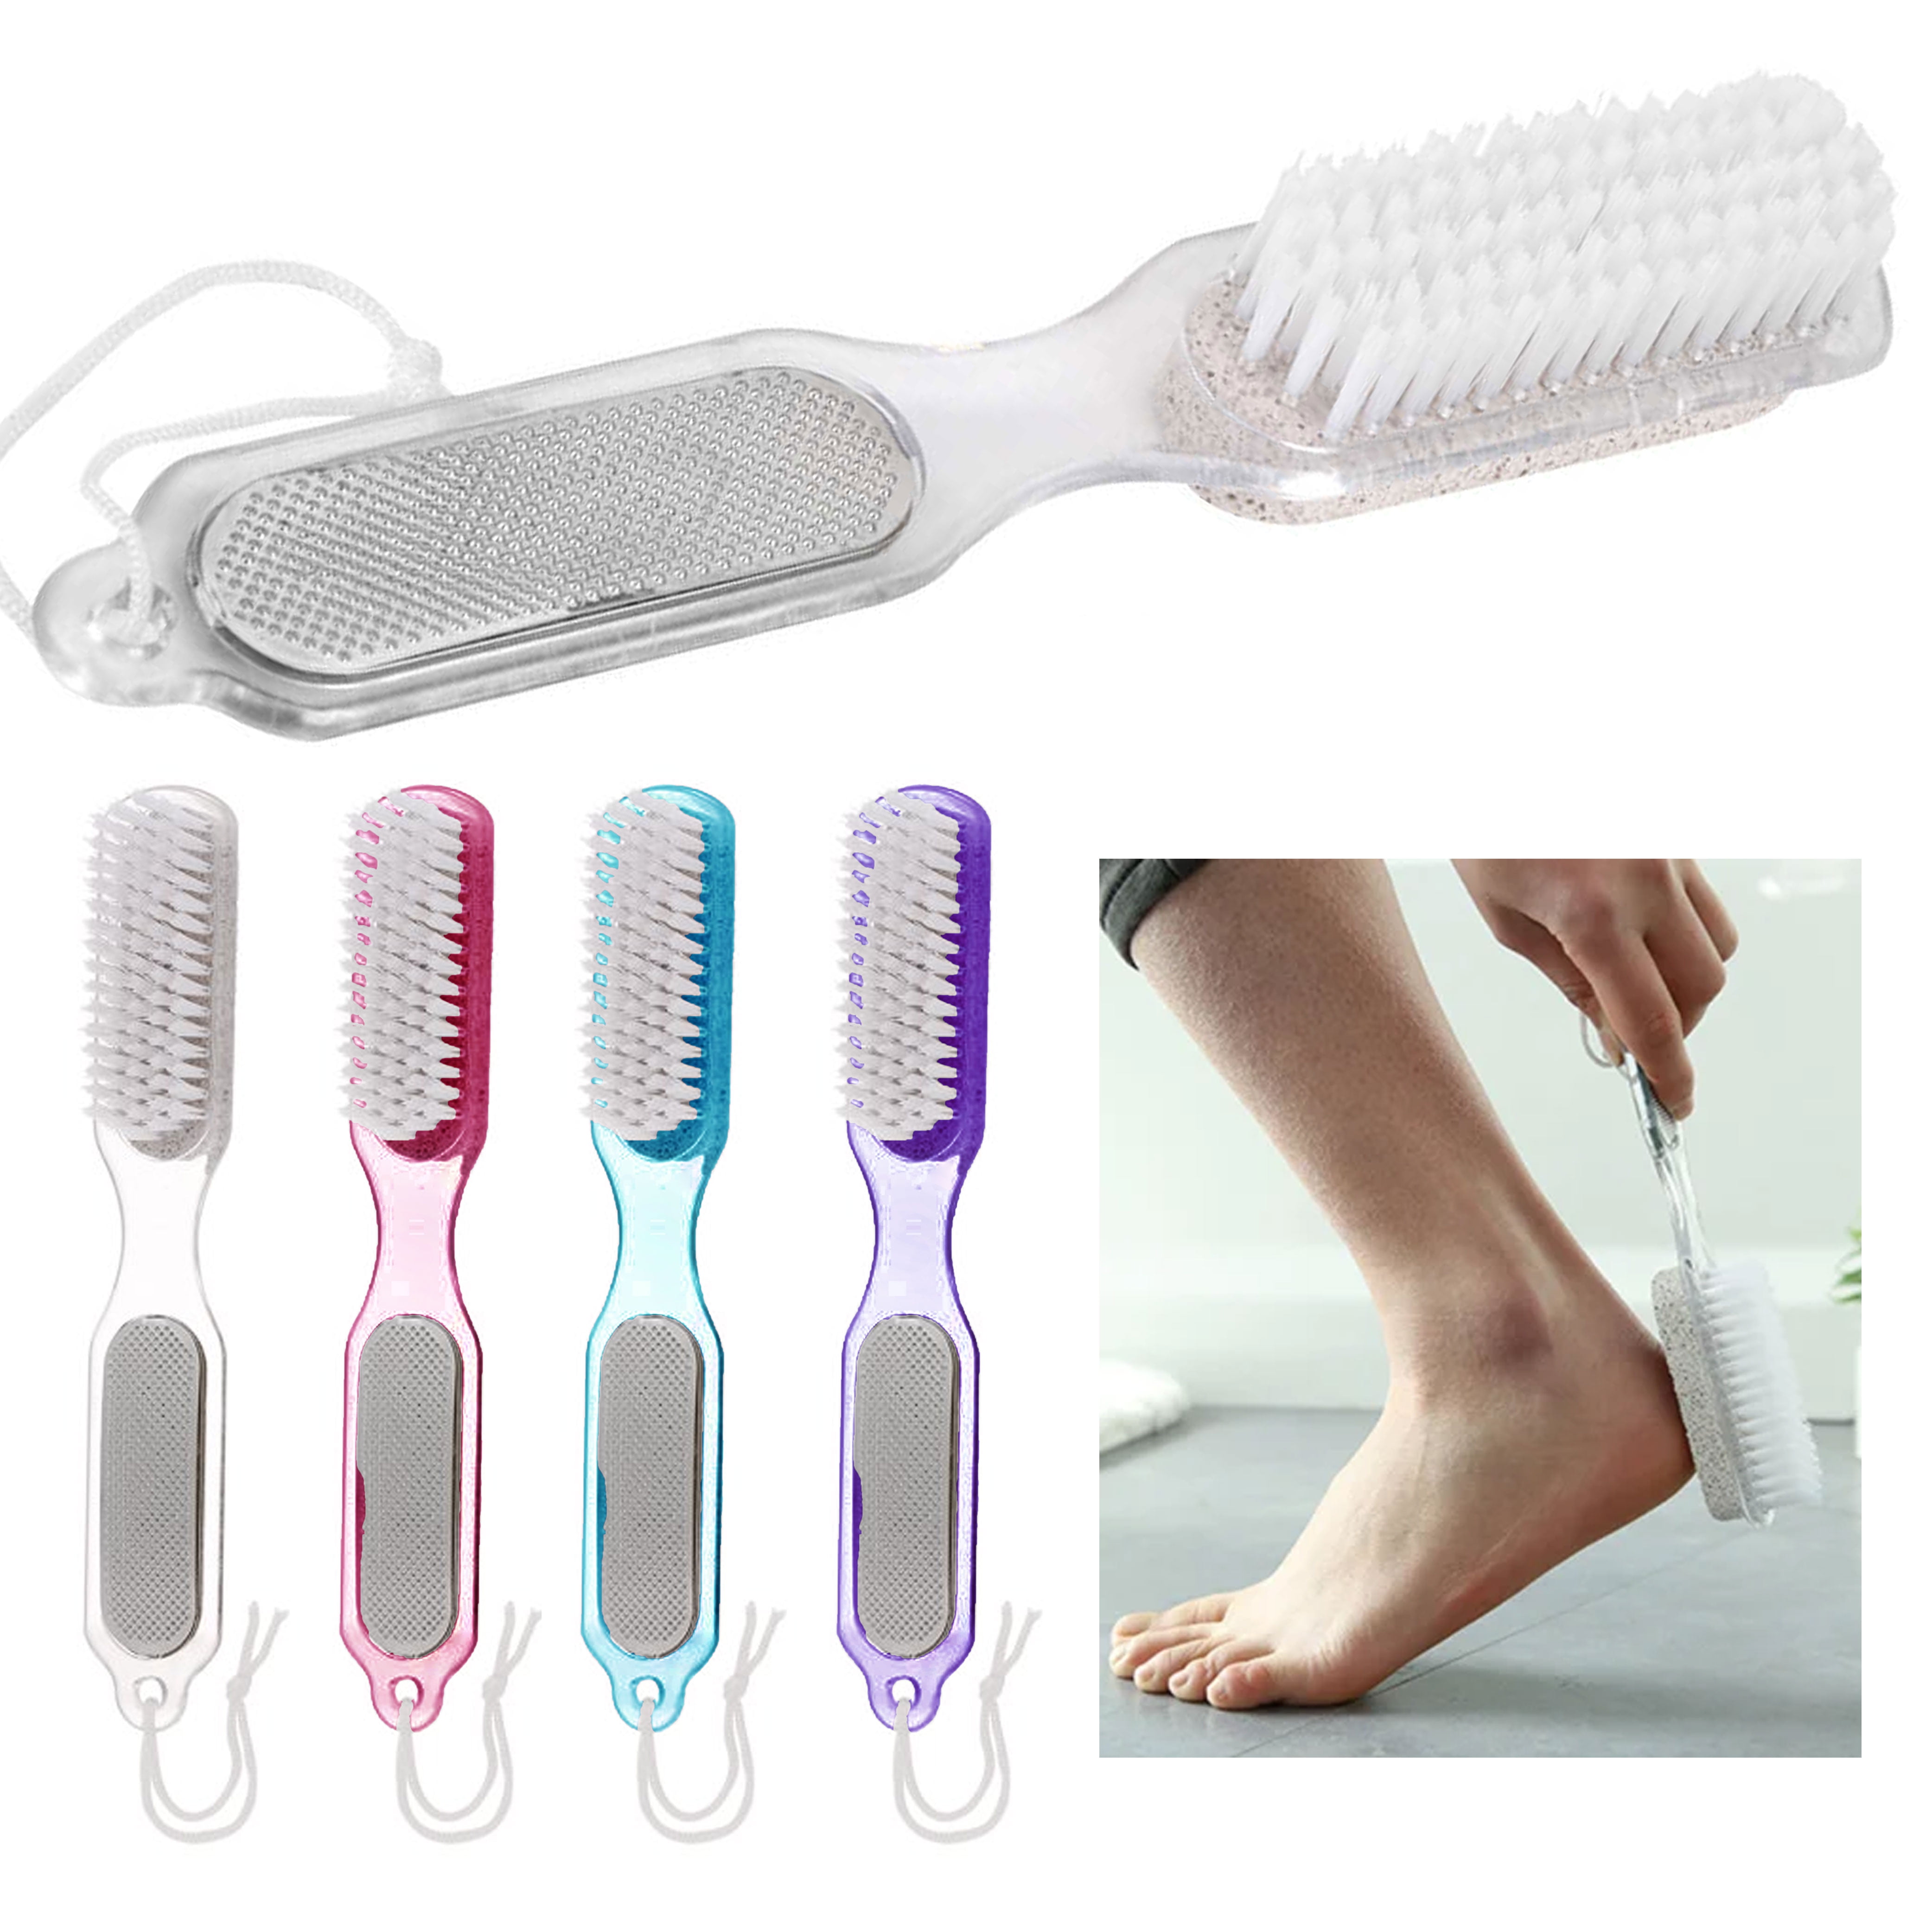 Buy Mepoint Double Sided Foot Scrubber for Dead Skin,Pedicure